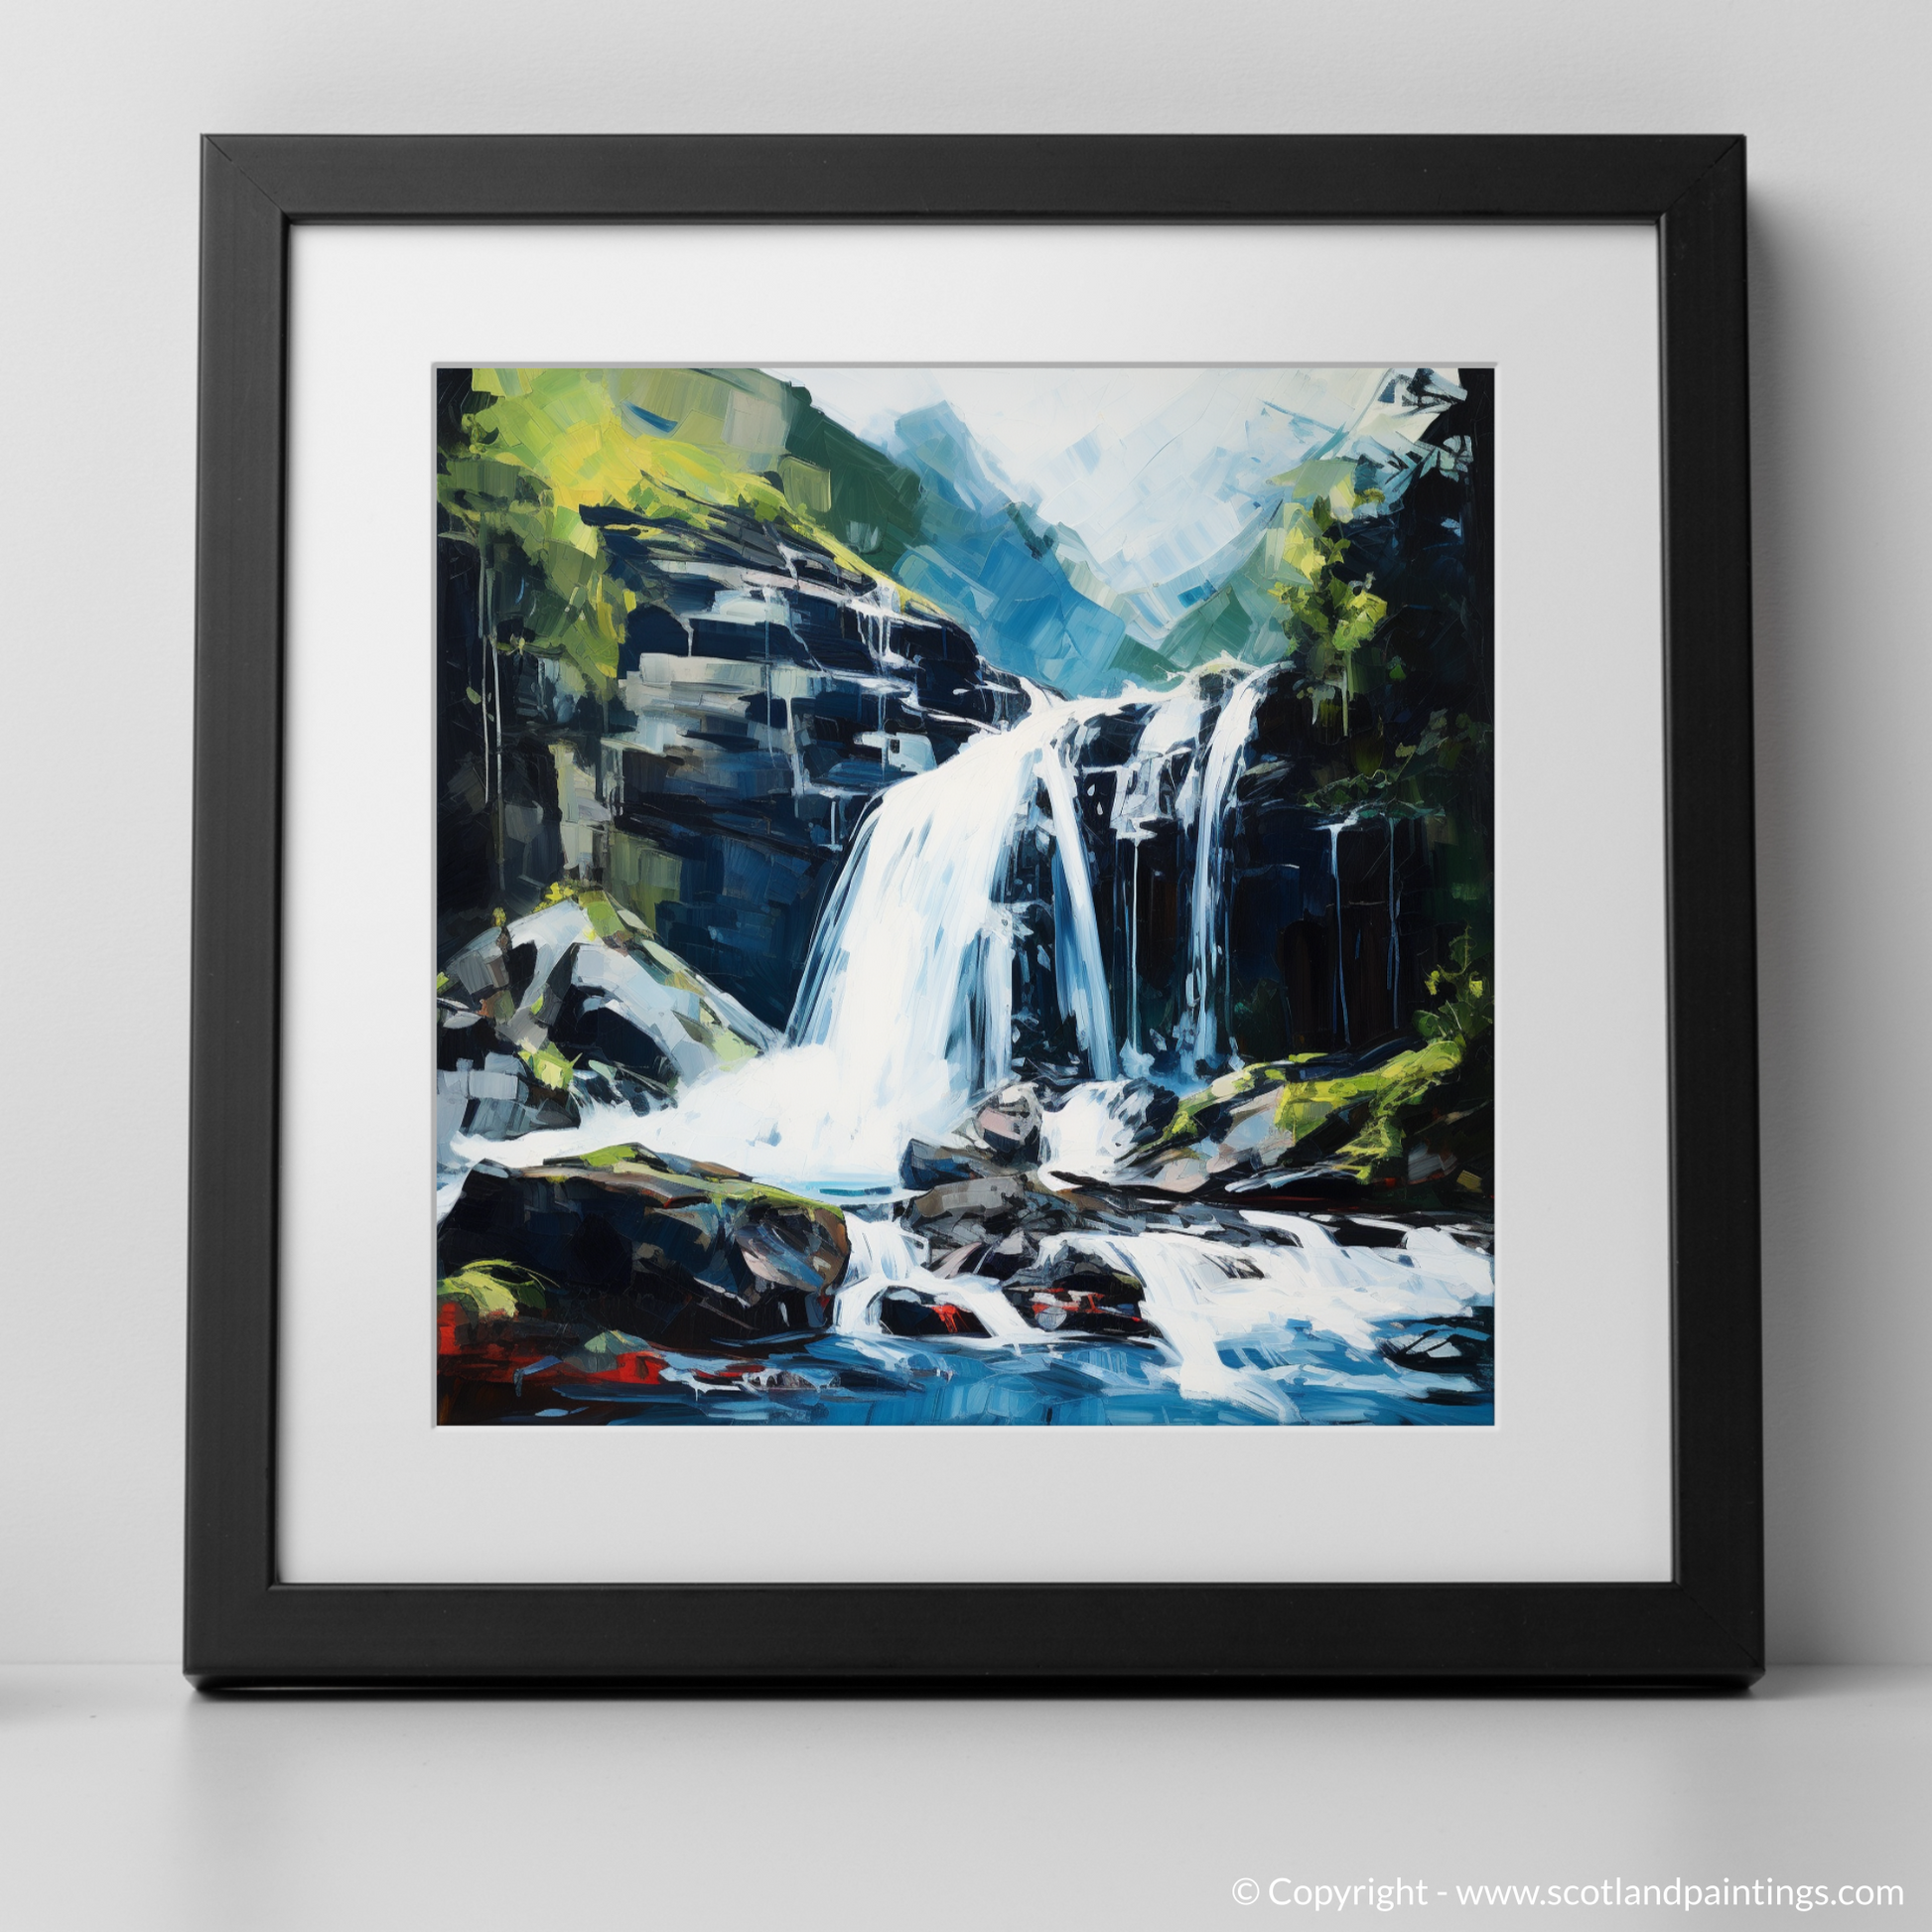 Art Print of Cascading waterfall in Glencoe with a black frame